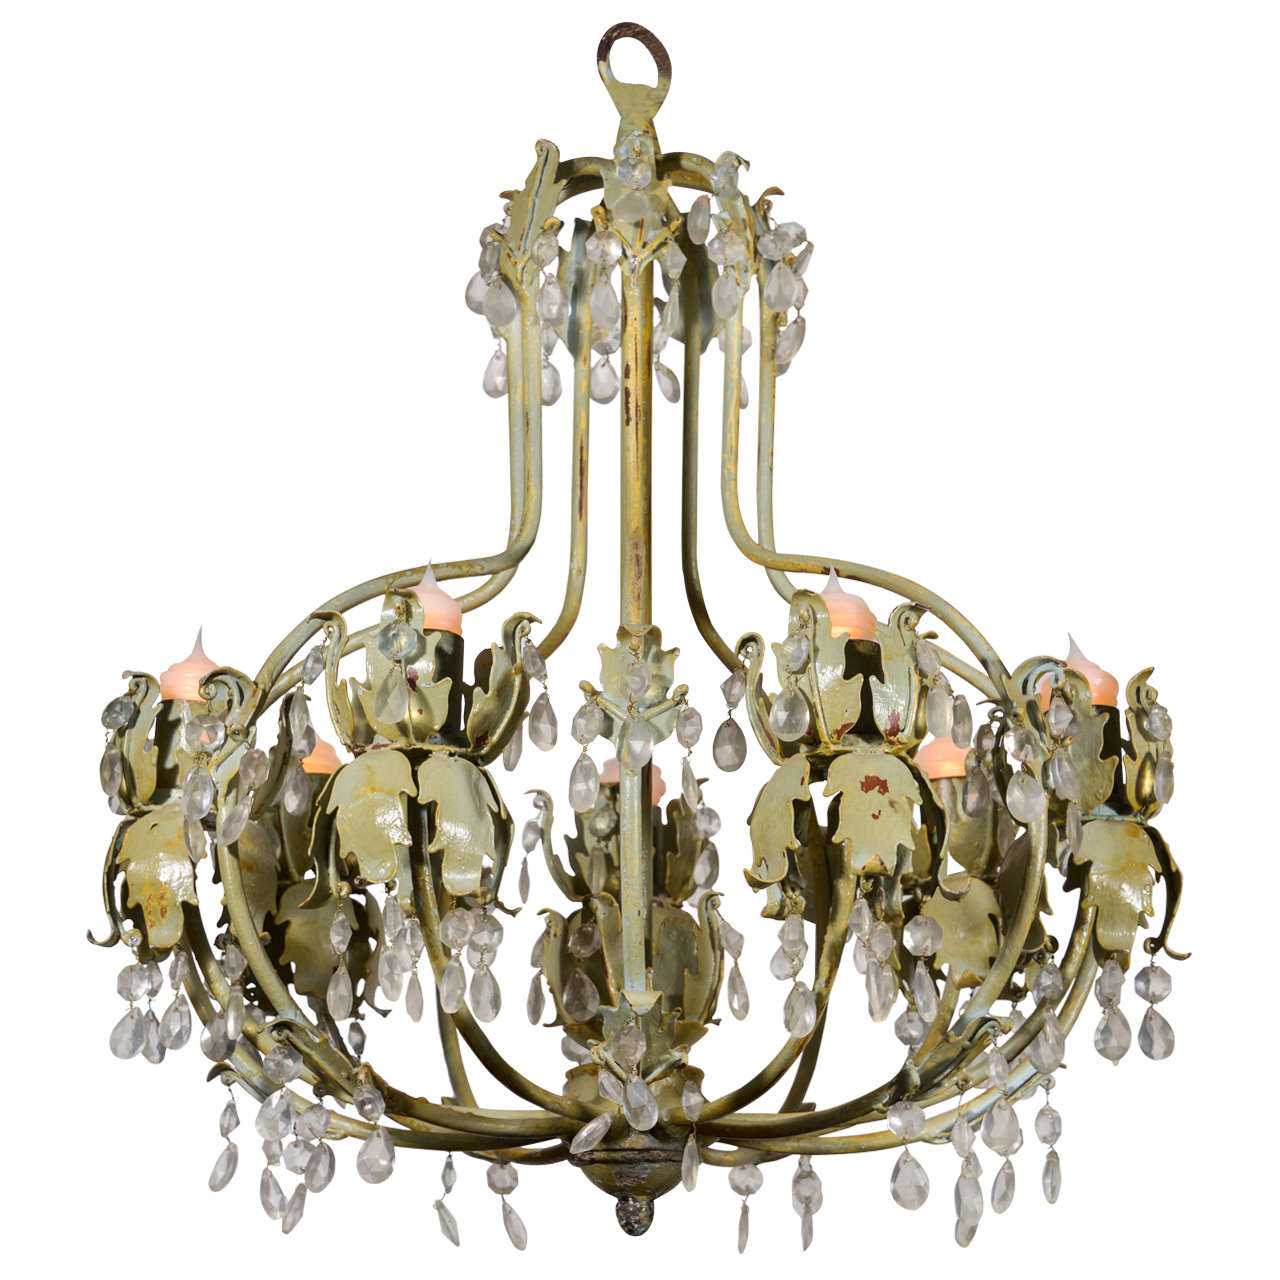 Vintage green-gray painted iron chandelier from France with eight lights each. Decorated in faceted pendants. Paint is distressed revealing layers of earlier light blue and beige paint underneath. Two available and priced separately at $4,600 each.
